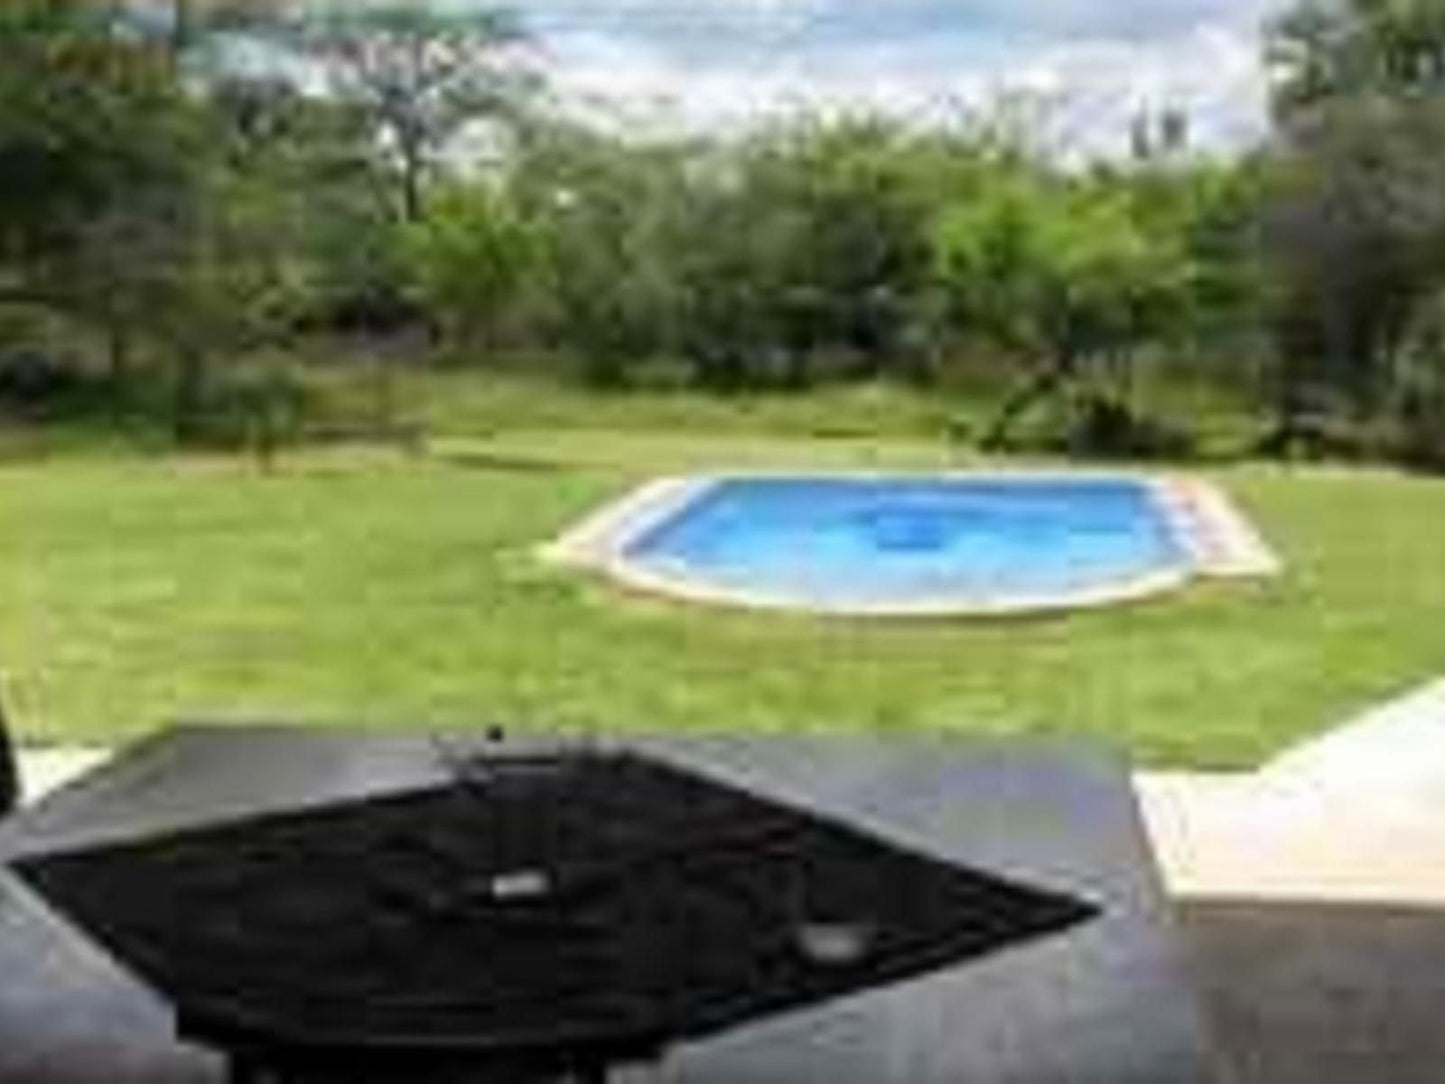 Waterberg Accommodation In Koro Creek Golf Estate Modimolle Nylstroom Limpopo Province South Africa Garden, Nature, Plant, Swimming Pool, Car, Vehicle